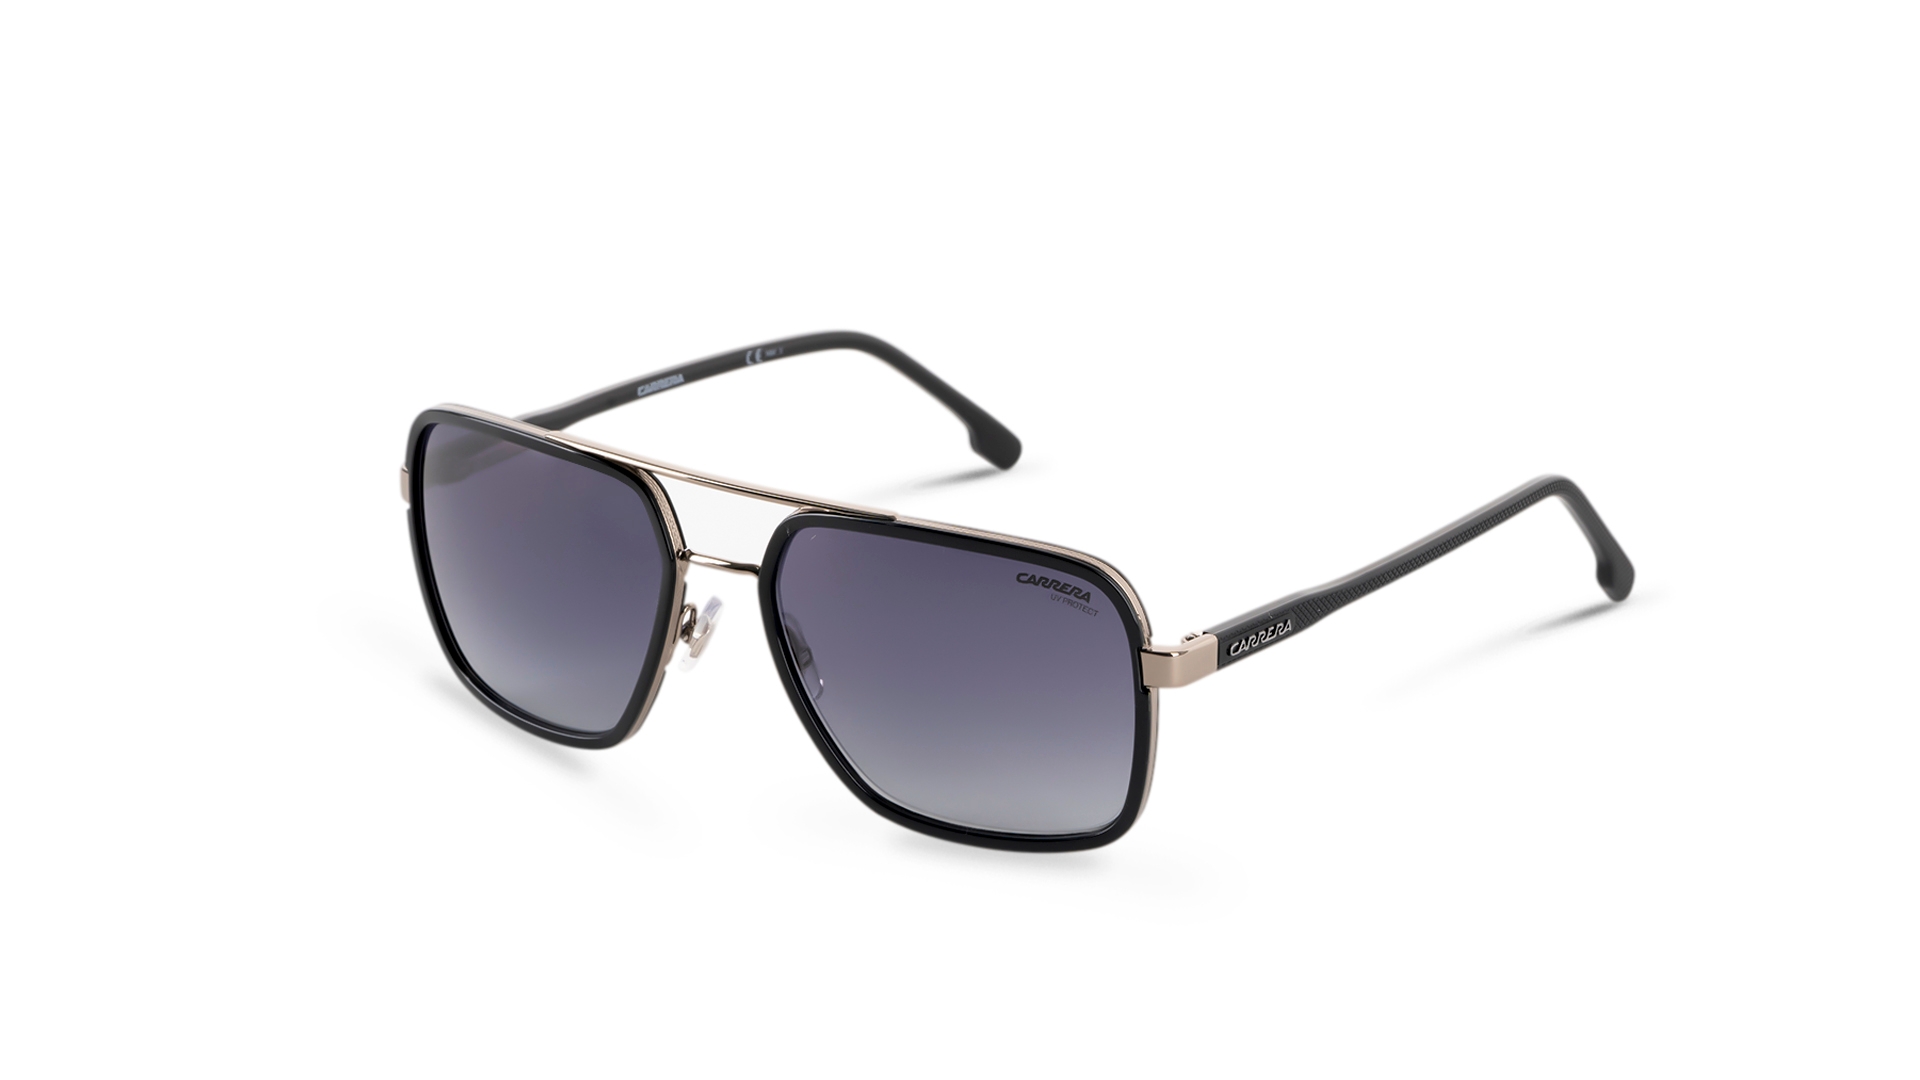 Carrera Full Rimmed Plastic Frame Rectangle Shape Rx Able Sunglasses Ca267s  0wtagb, Sunglasses, Clothing & Accessories